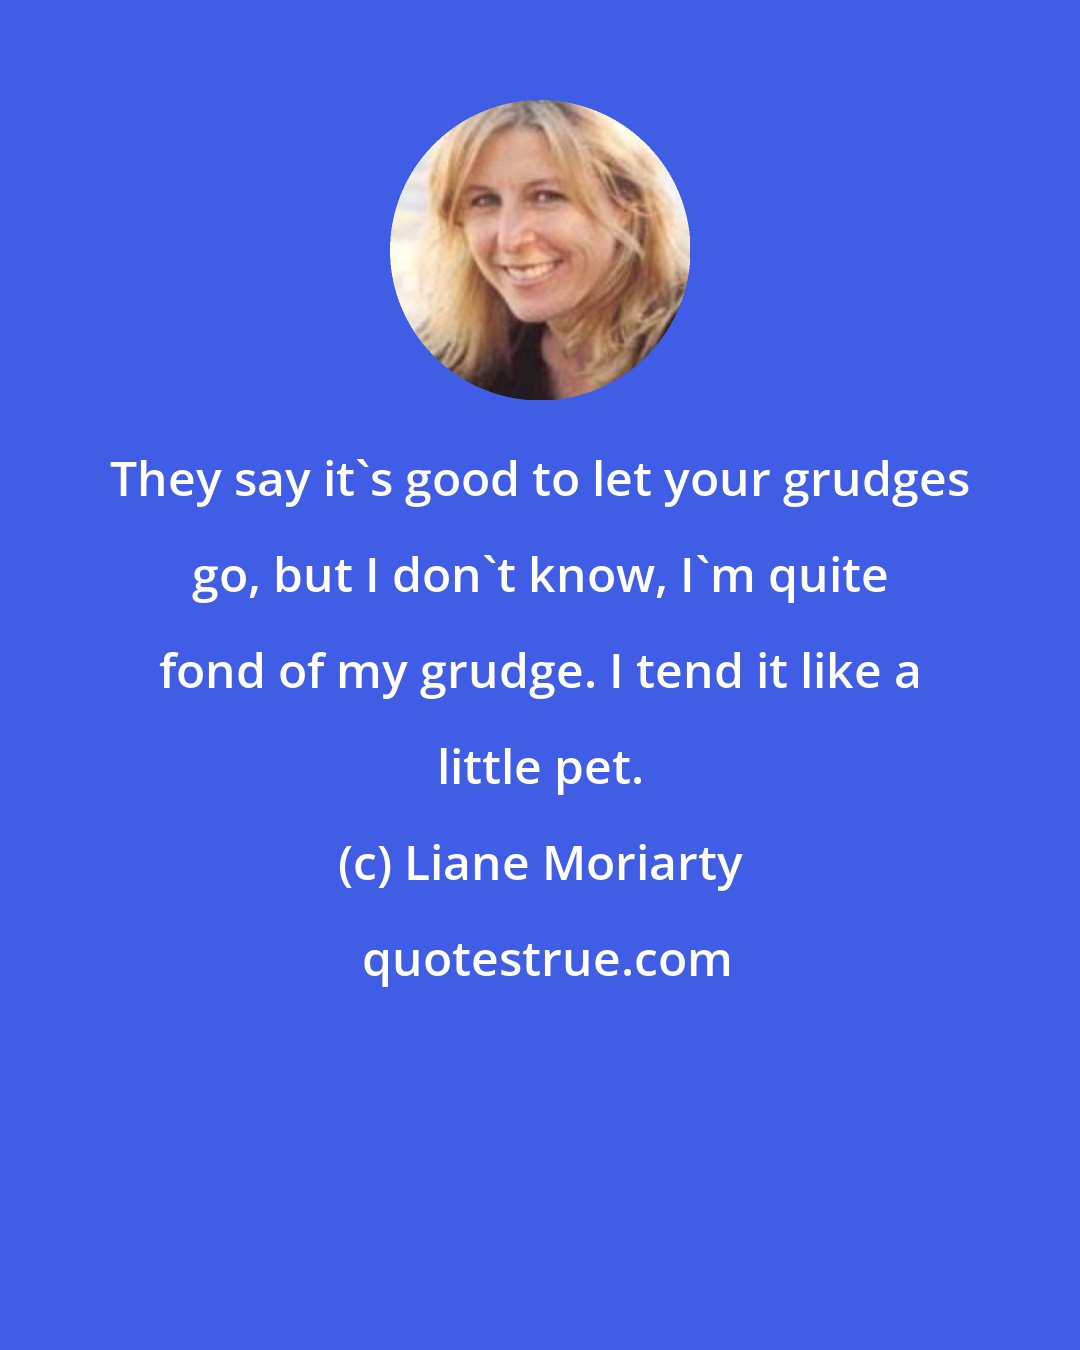 Liane Moriarty: They say it's good to let your grudges go, but I don't know, I'm quite fond of my grudge. I tend it like a little pet.